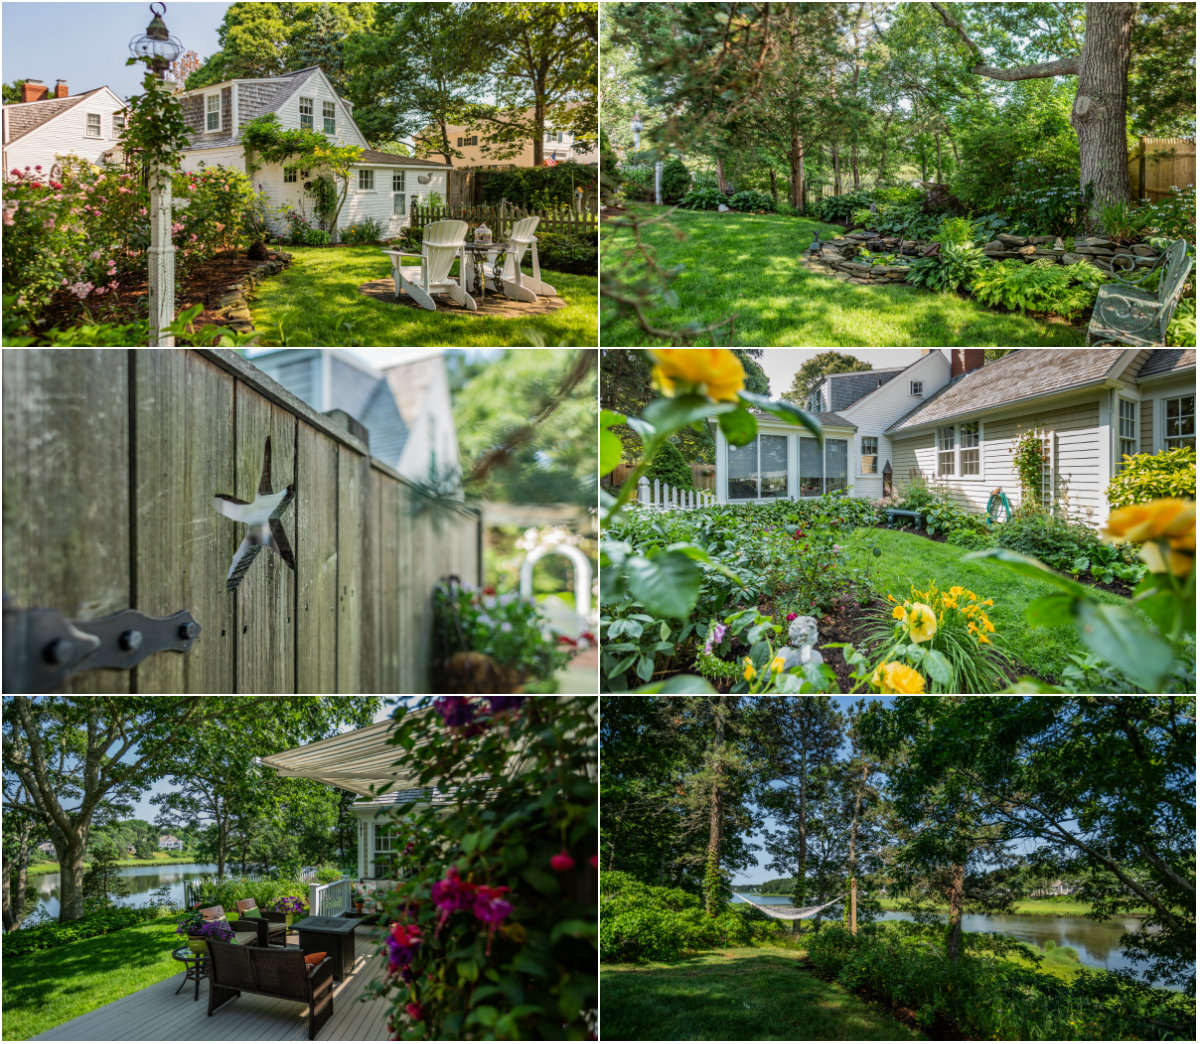 Images of Beautiful Garden at 26 Heirs Landing in South Dennis Cape Cod, MA